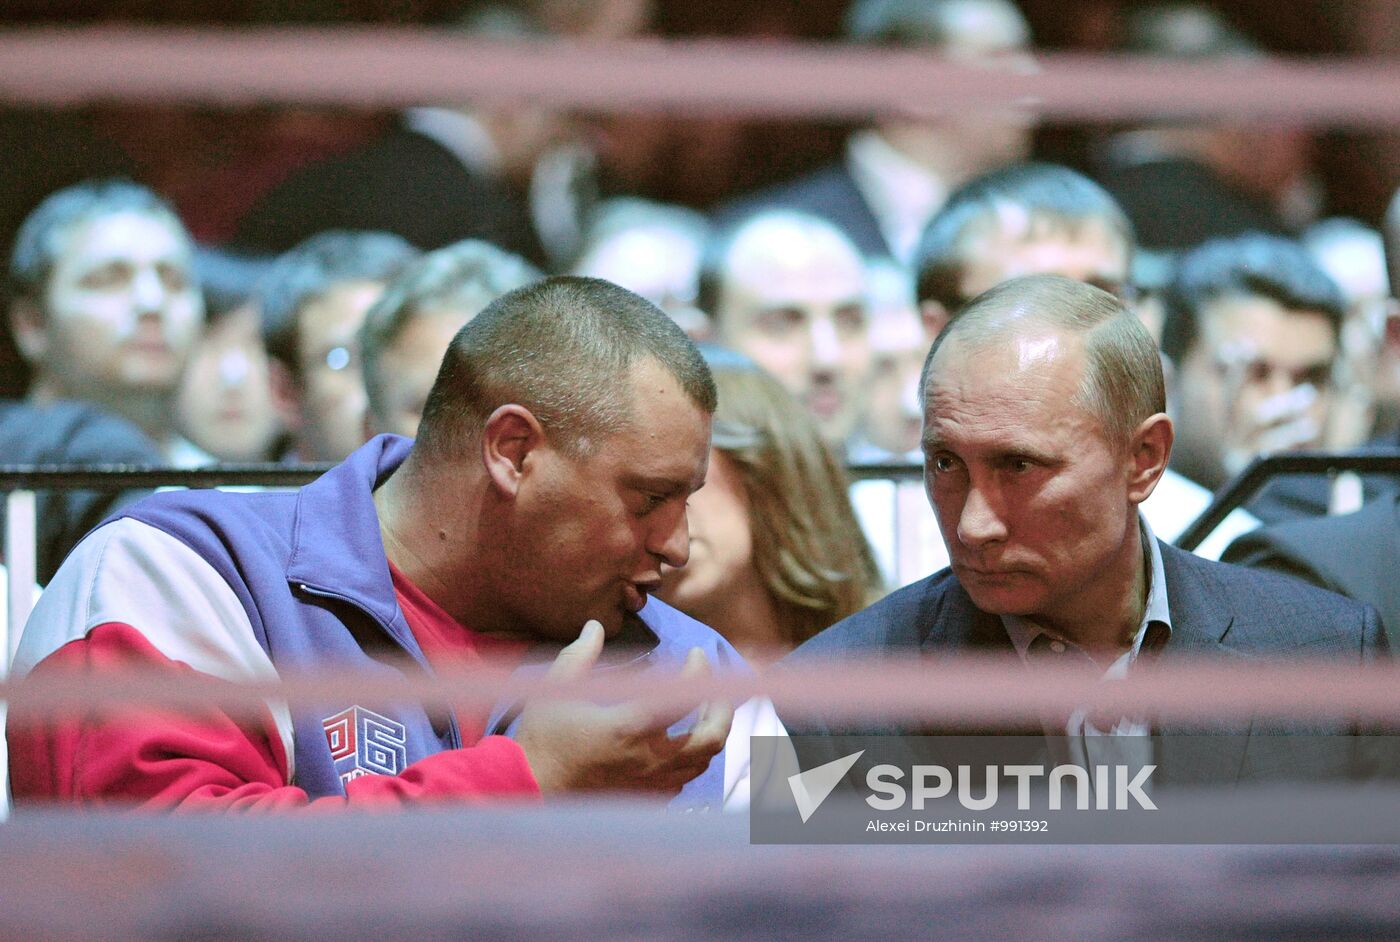 Vladimir Putin attends M-1 Global mixed martial arts competition